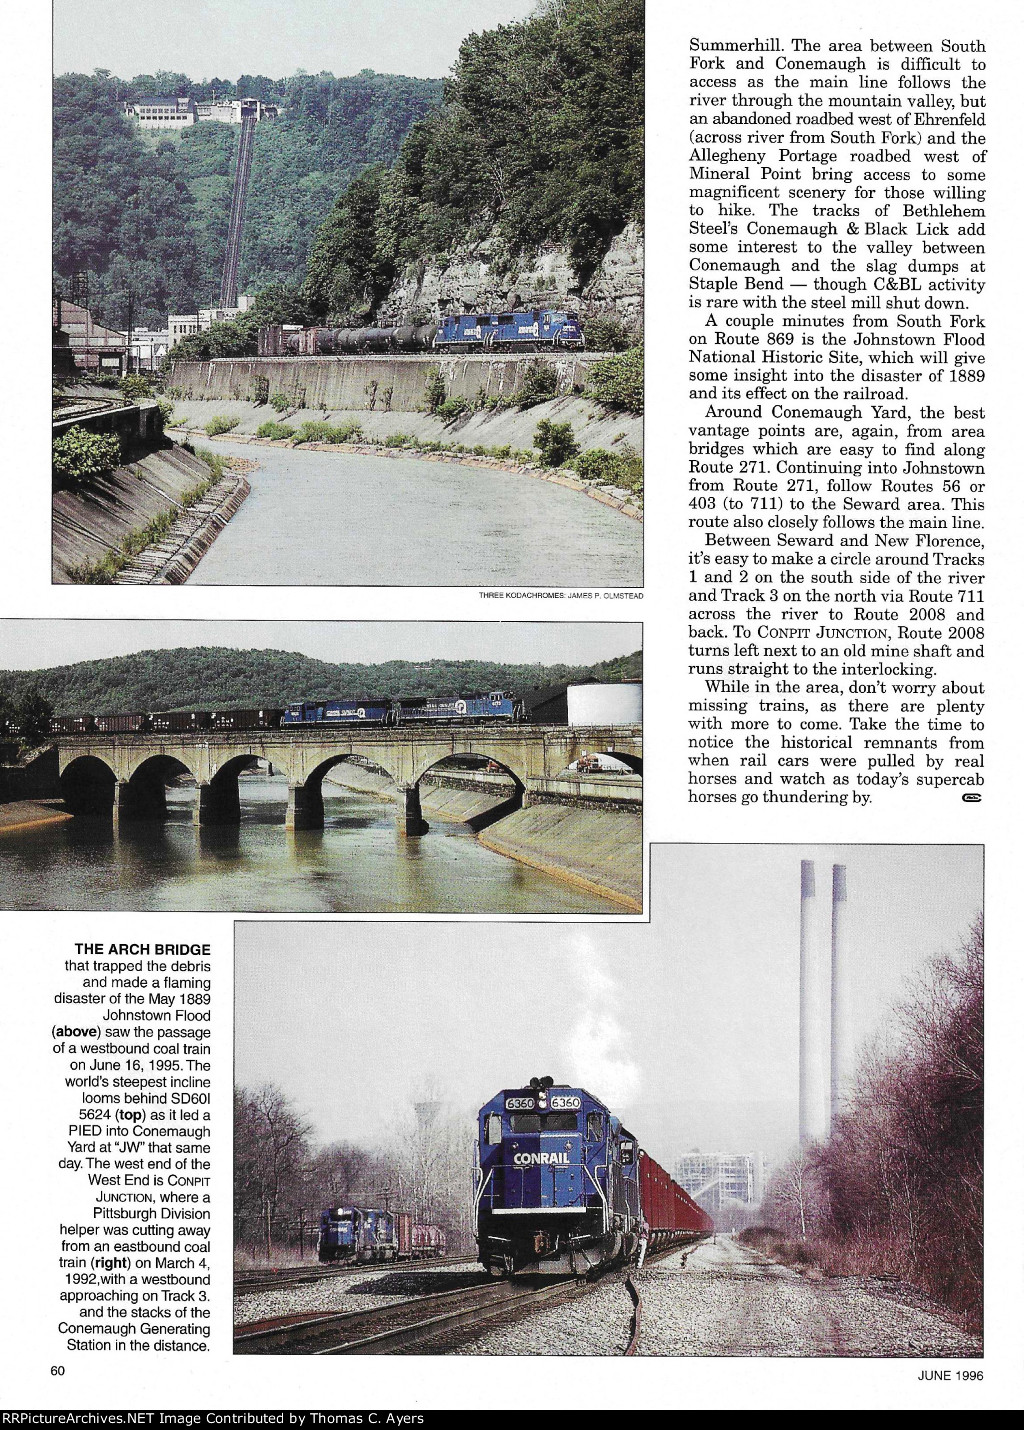 "Conrail At The Heart Of The Pennsy," Page 60, 1996